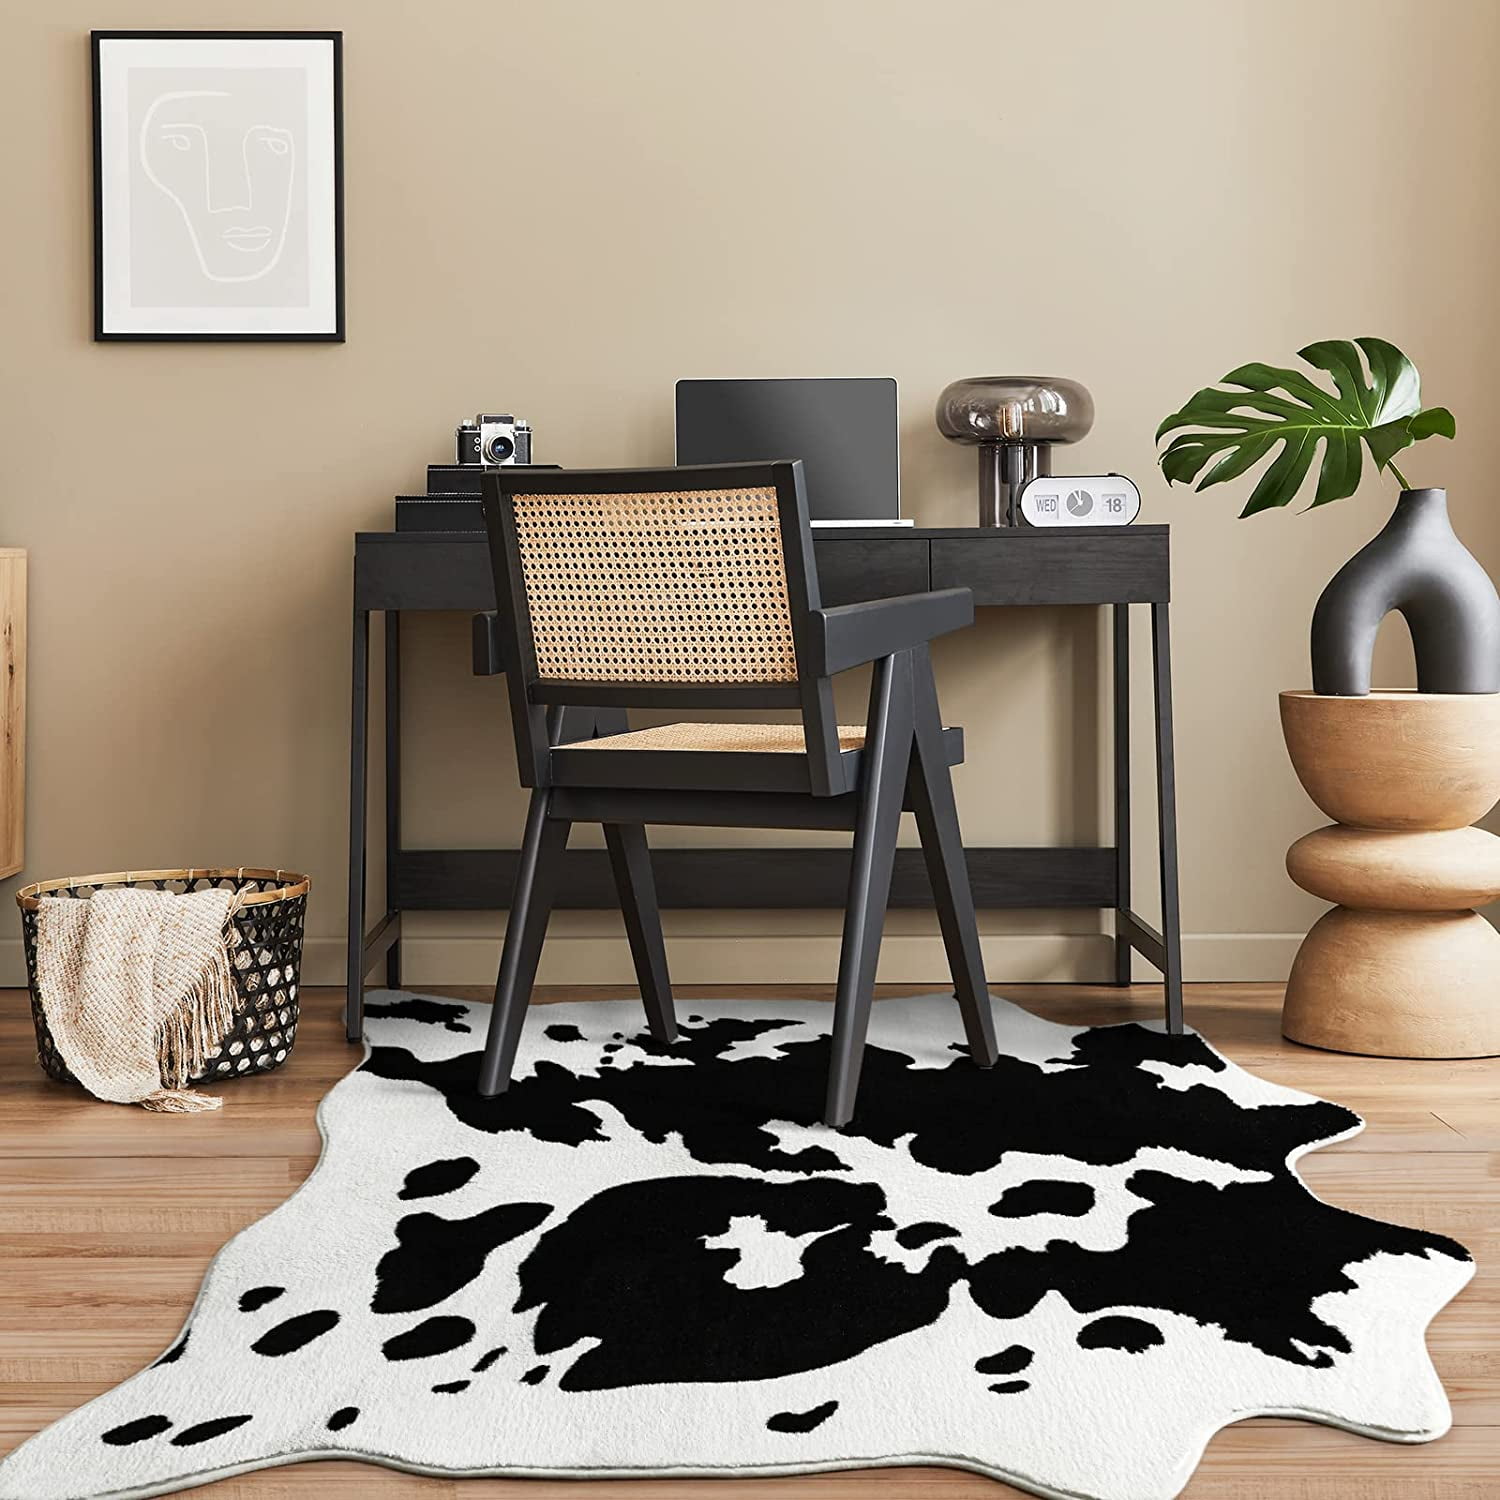 Yincimar Faux Cowhide Rug Extra Large Cow Print Area Rug 5.2ft x 6.6ft Non- 